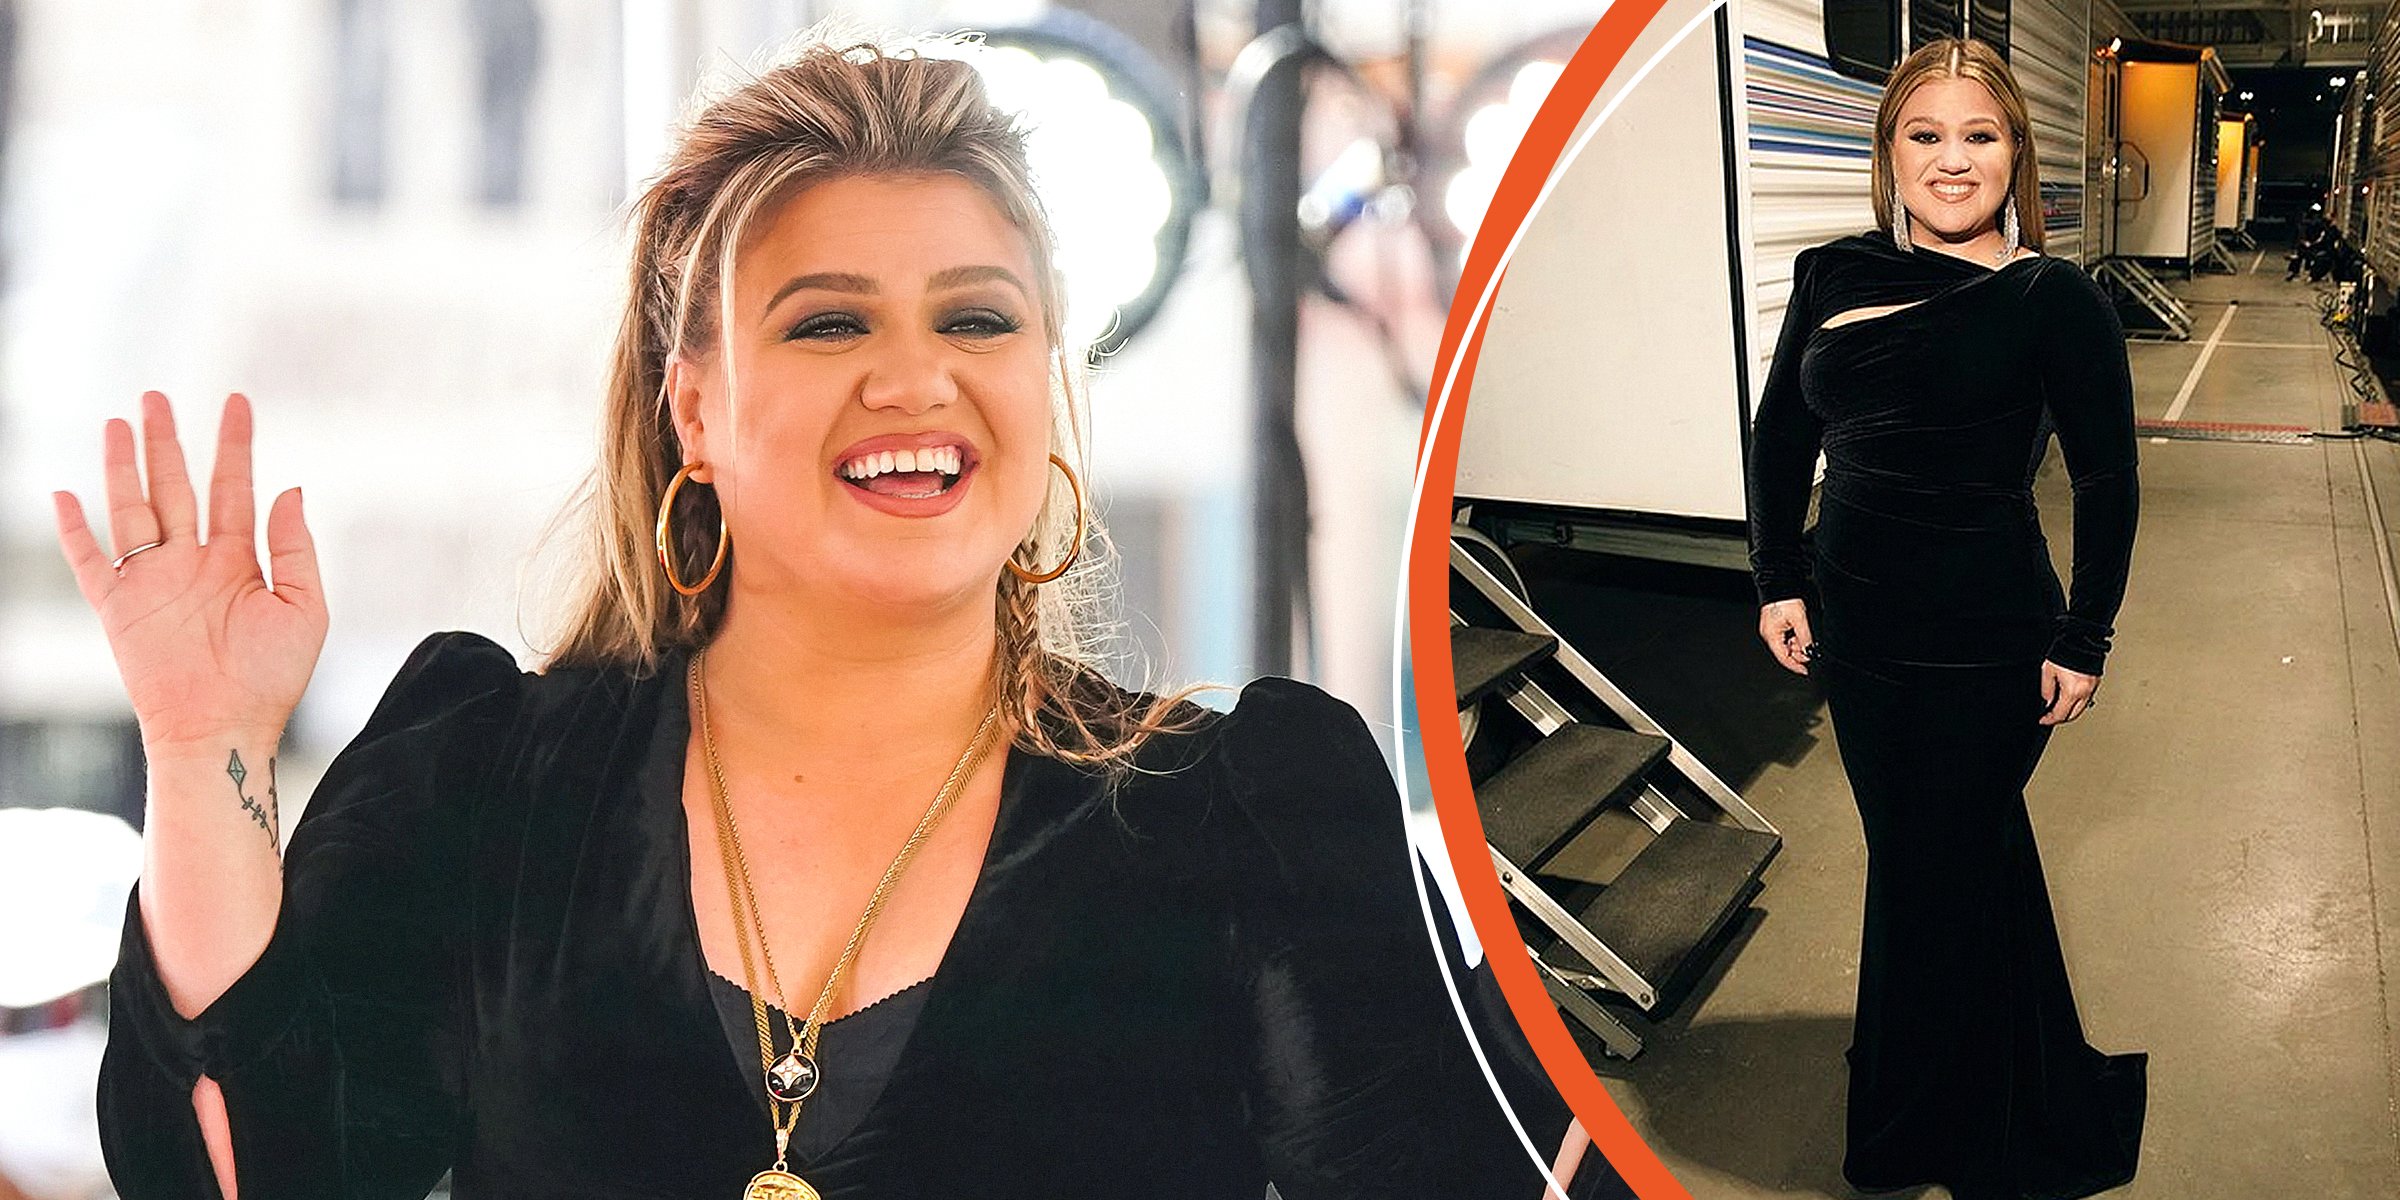 Kelly Clarkson | Quelle: Instagram.com/Kelly Clarkson | Getty Images 